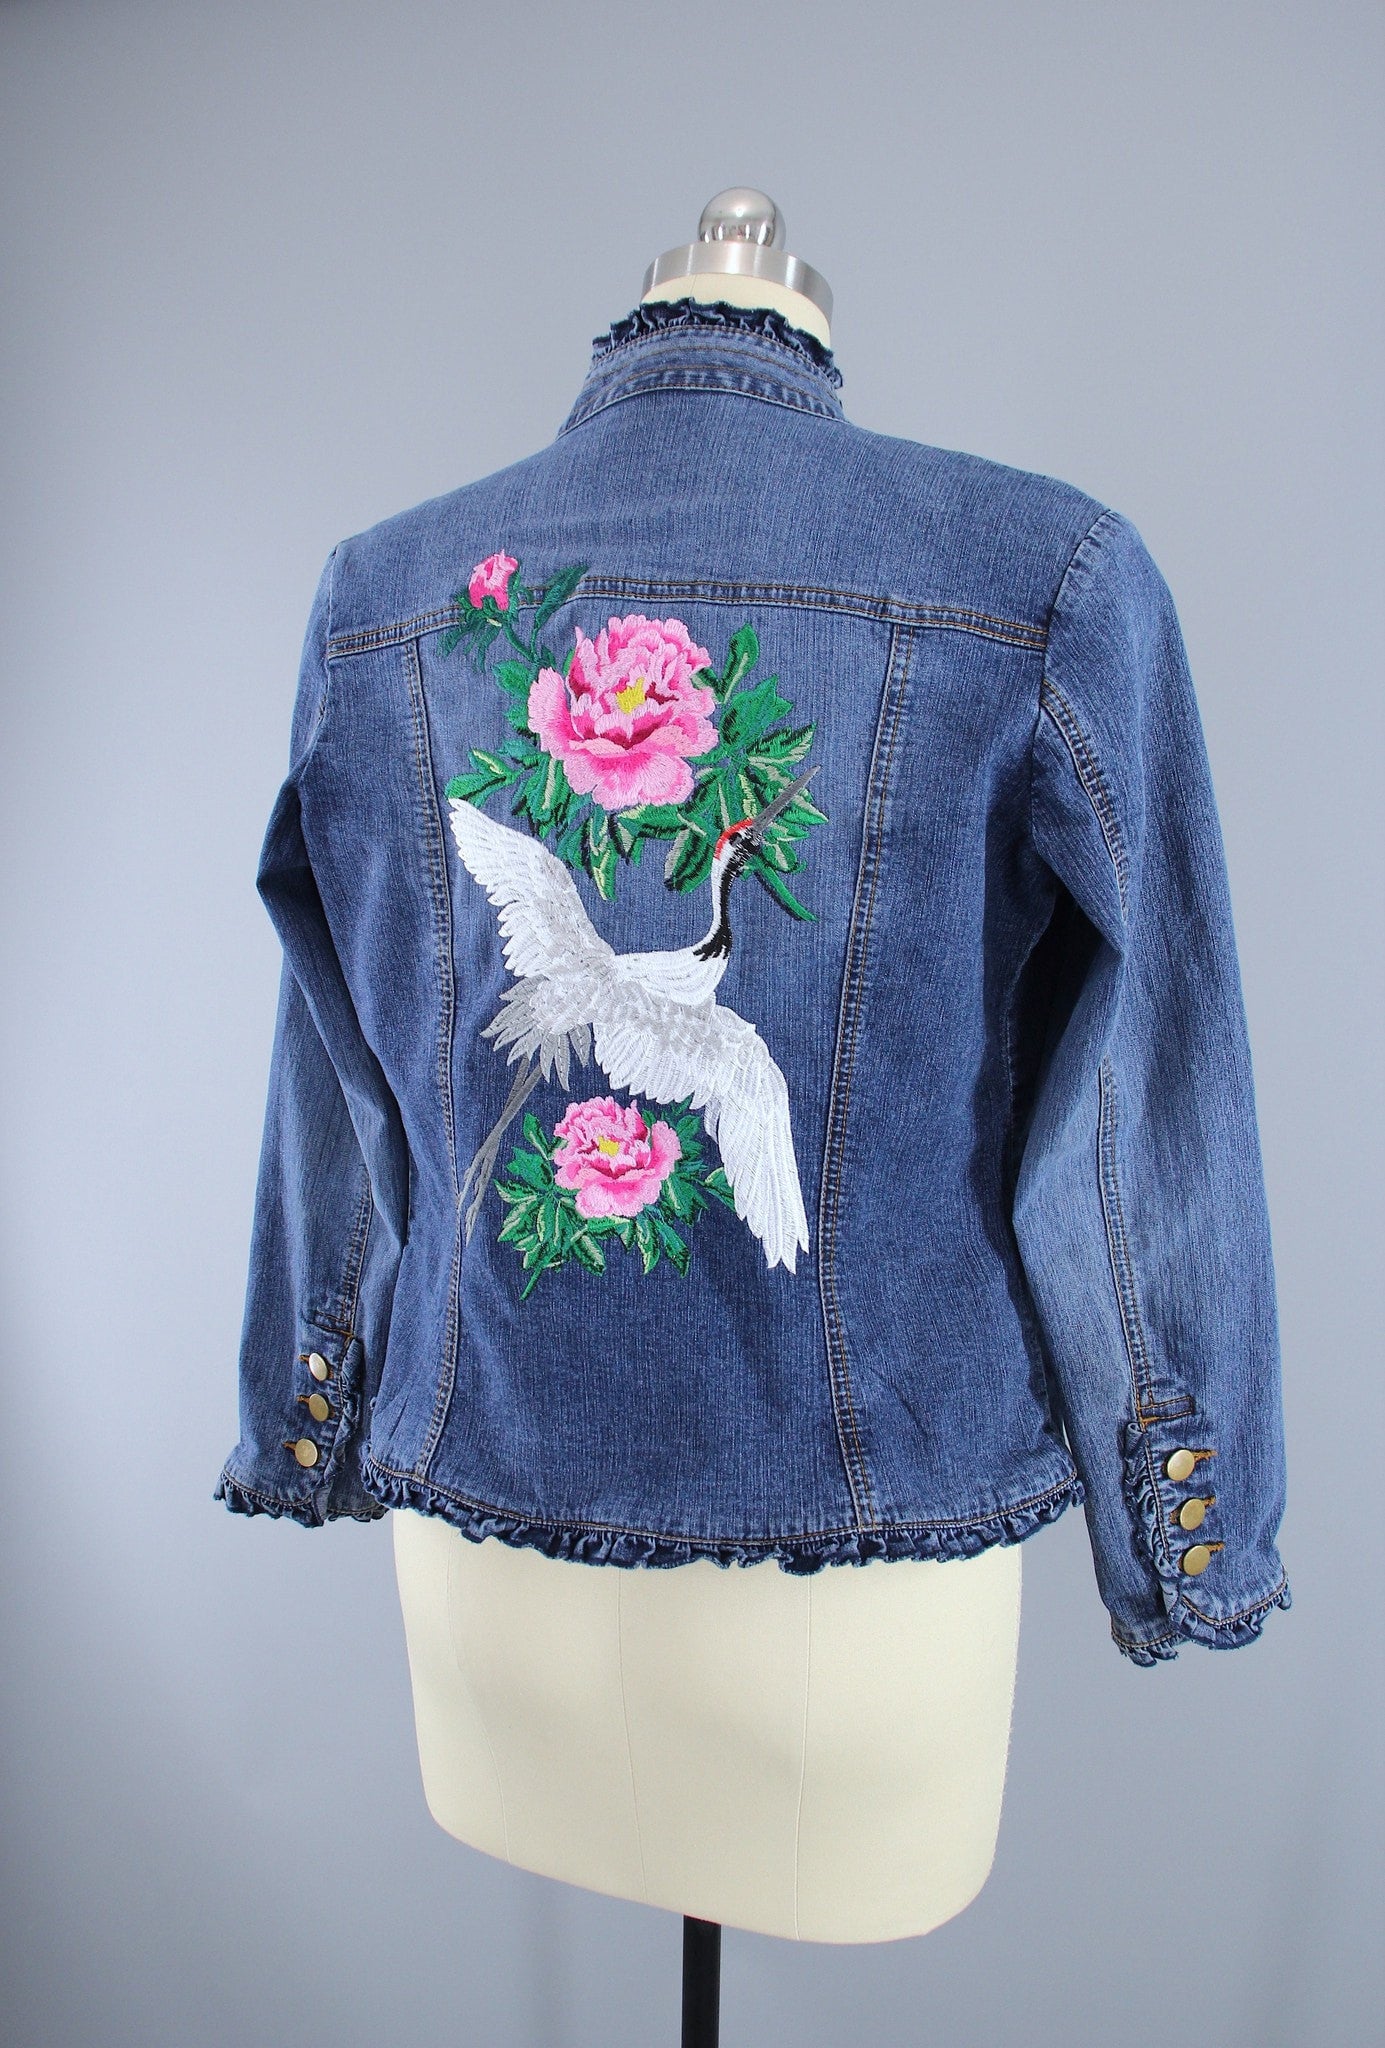 Embroidered Denim Jacket / Asian Crane Bird & Peony Floral Embroidery - ThisBlueBird